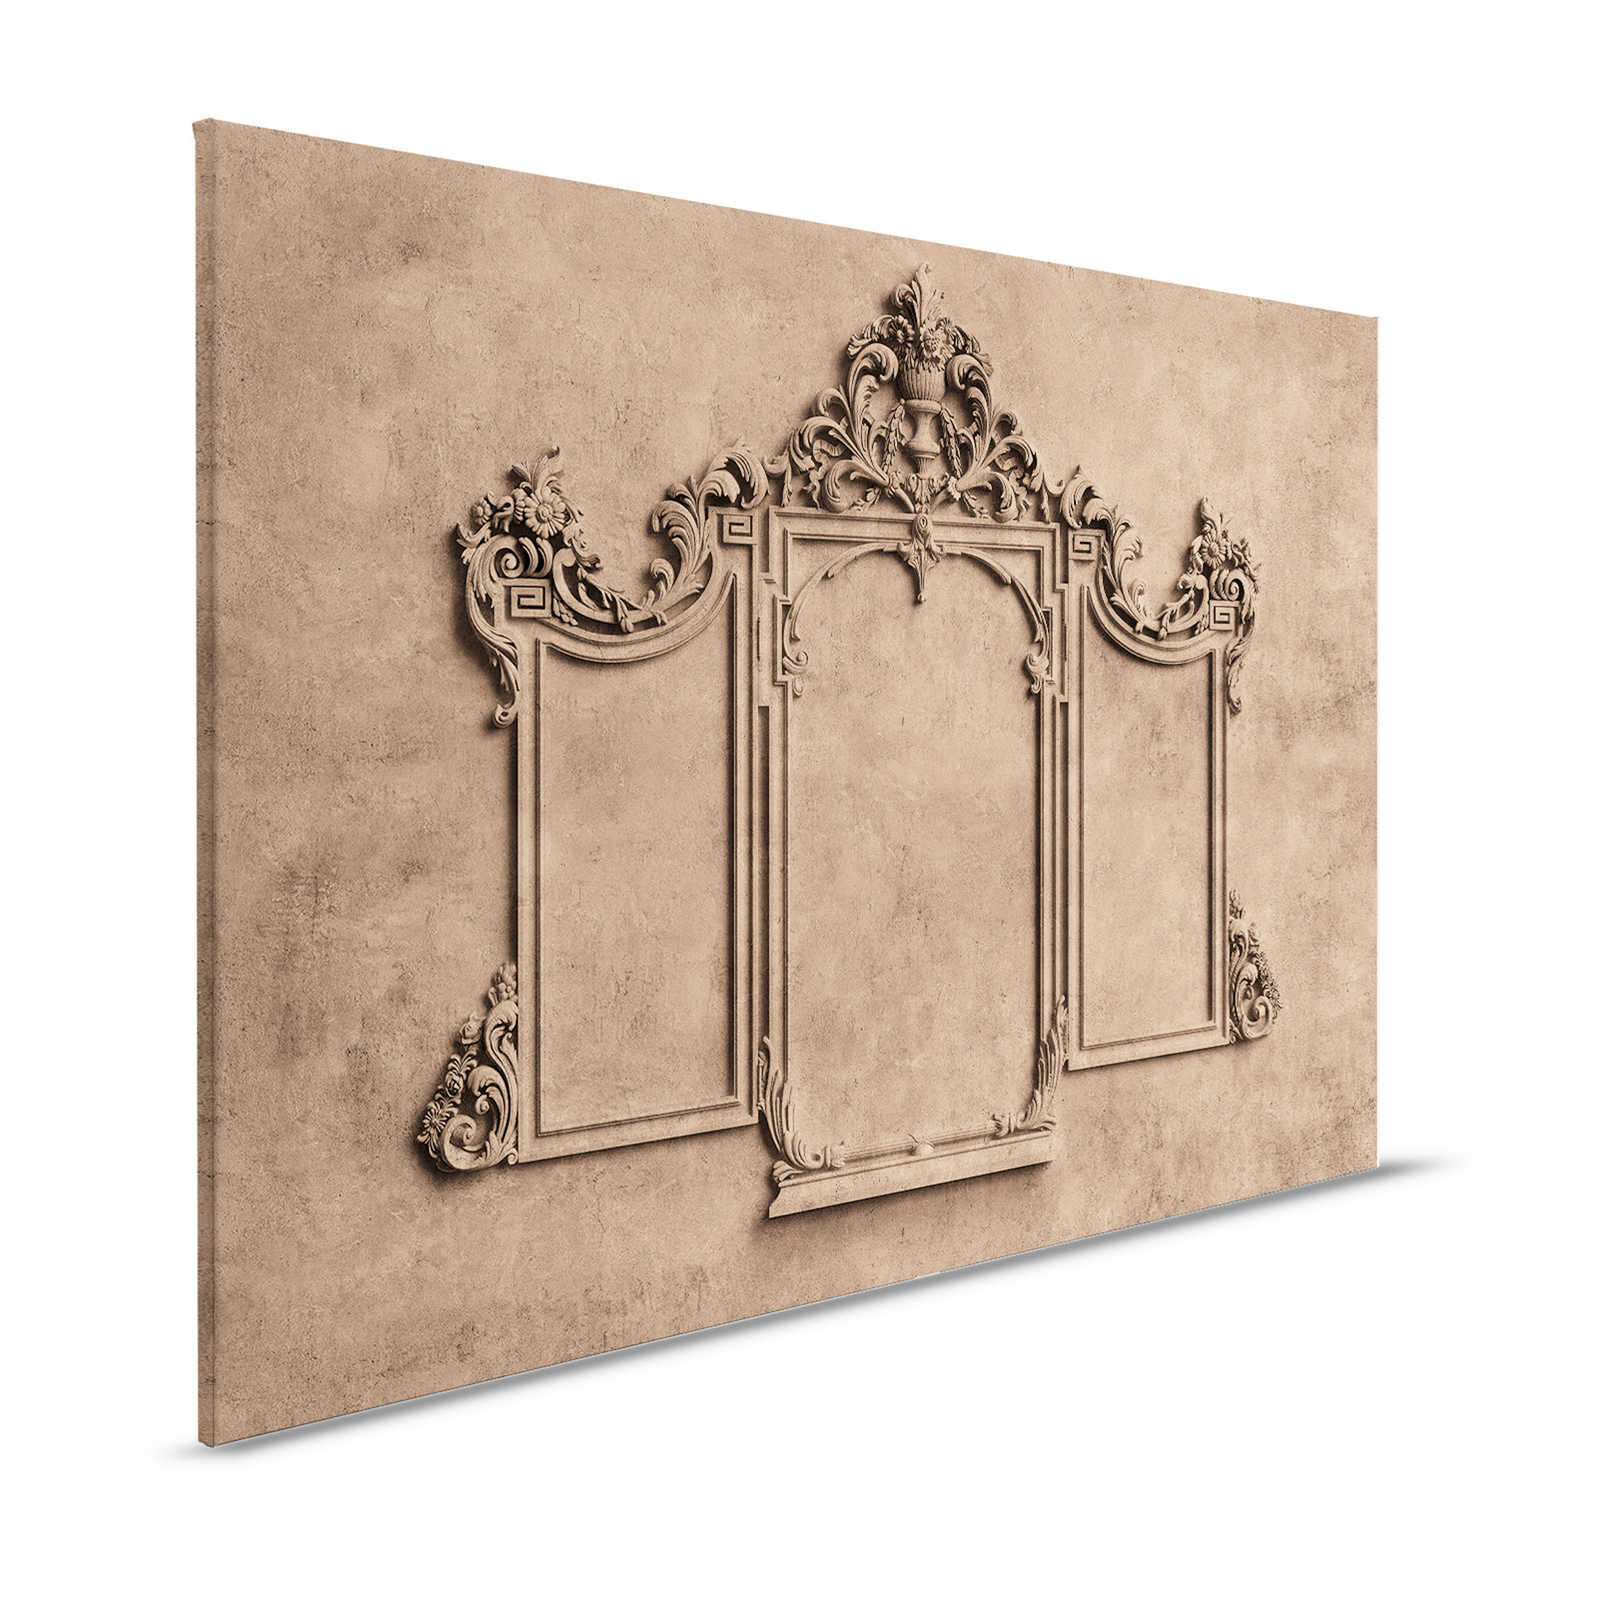 Lyon 1 - Canvas painting 3D stucco frame & plaster look in brown - 1.20 m x 0.80 m
